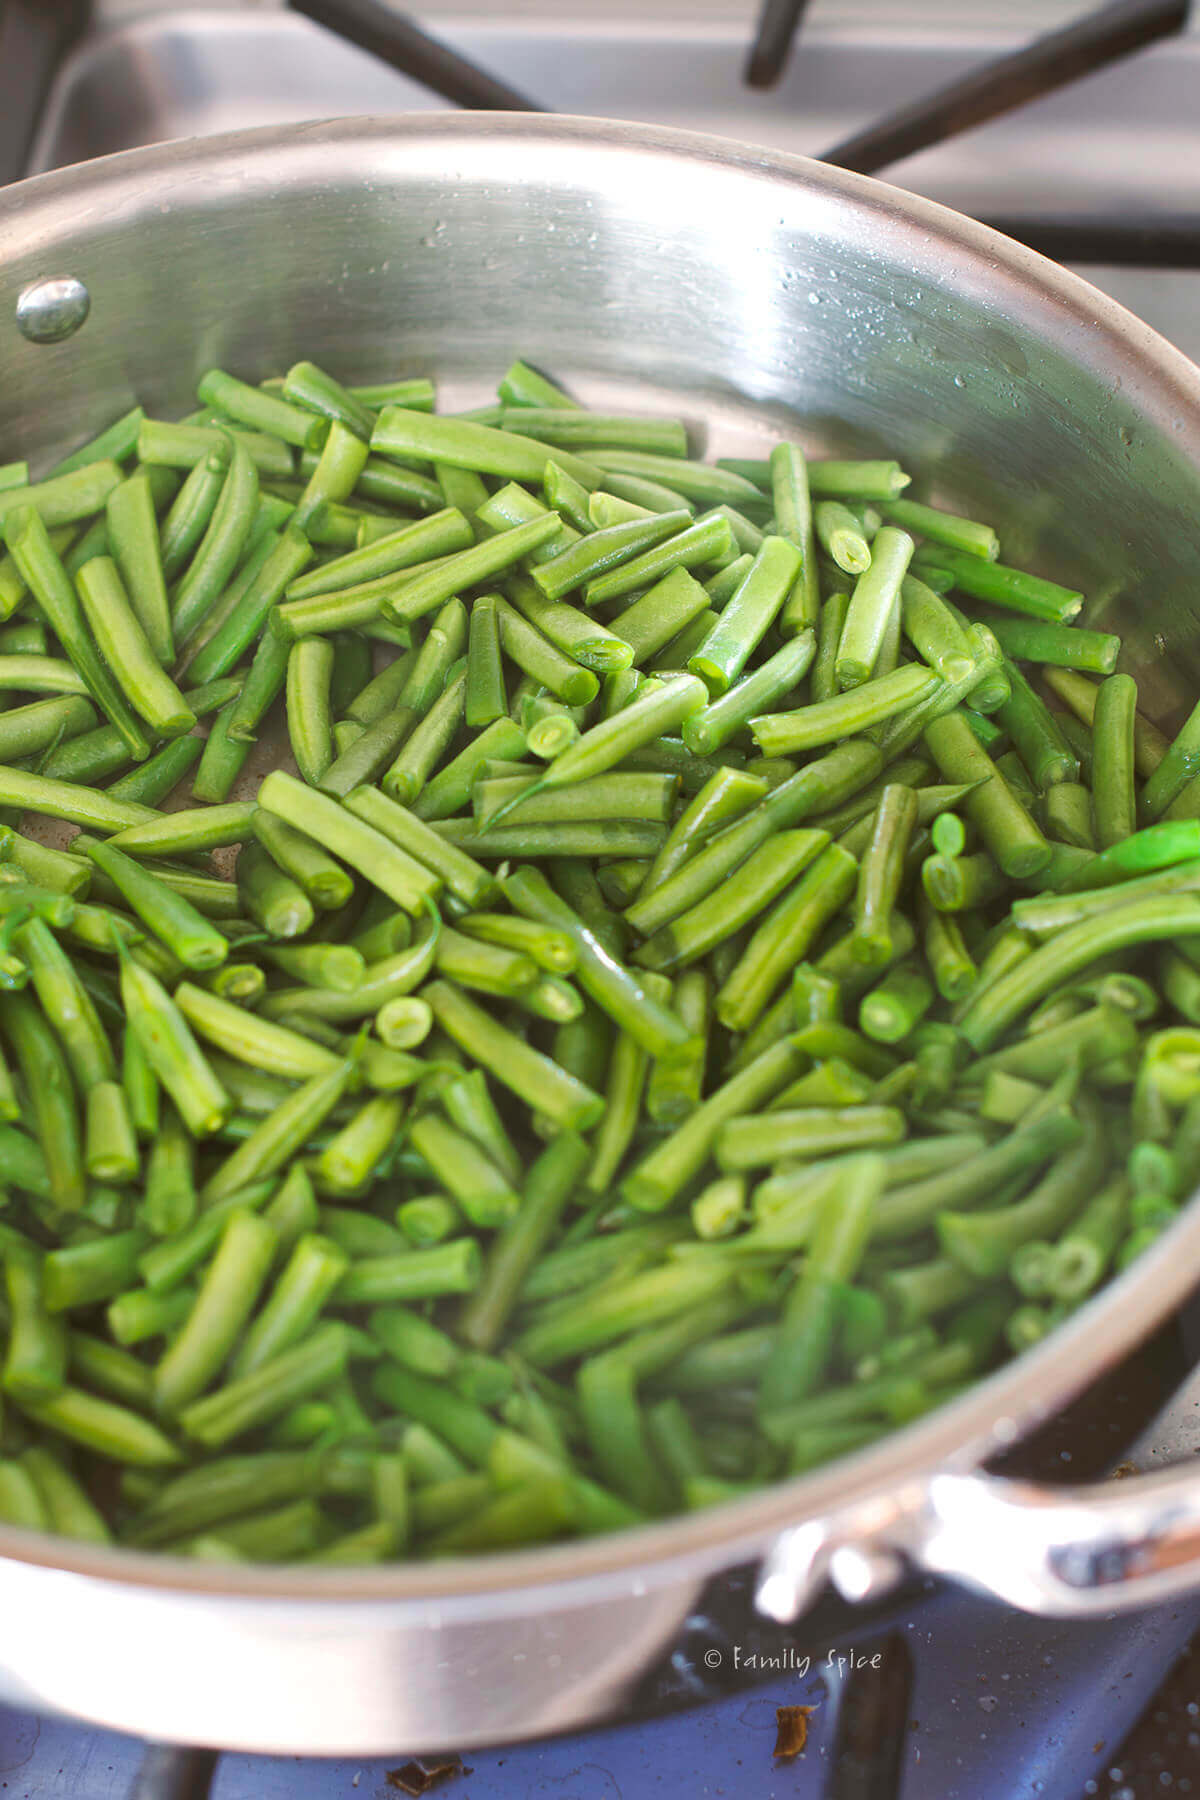 A stainless pan with sautéed green beans in it